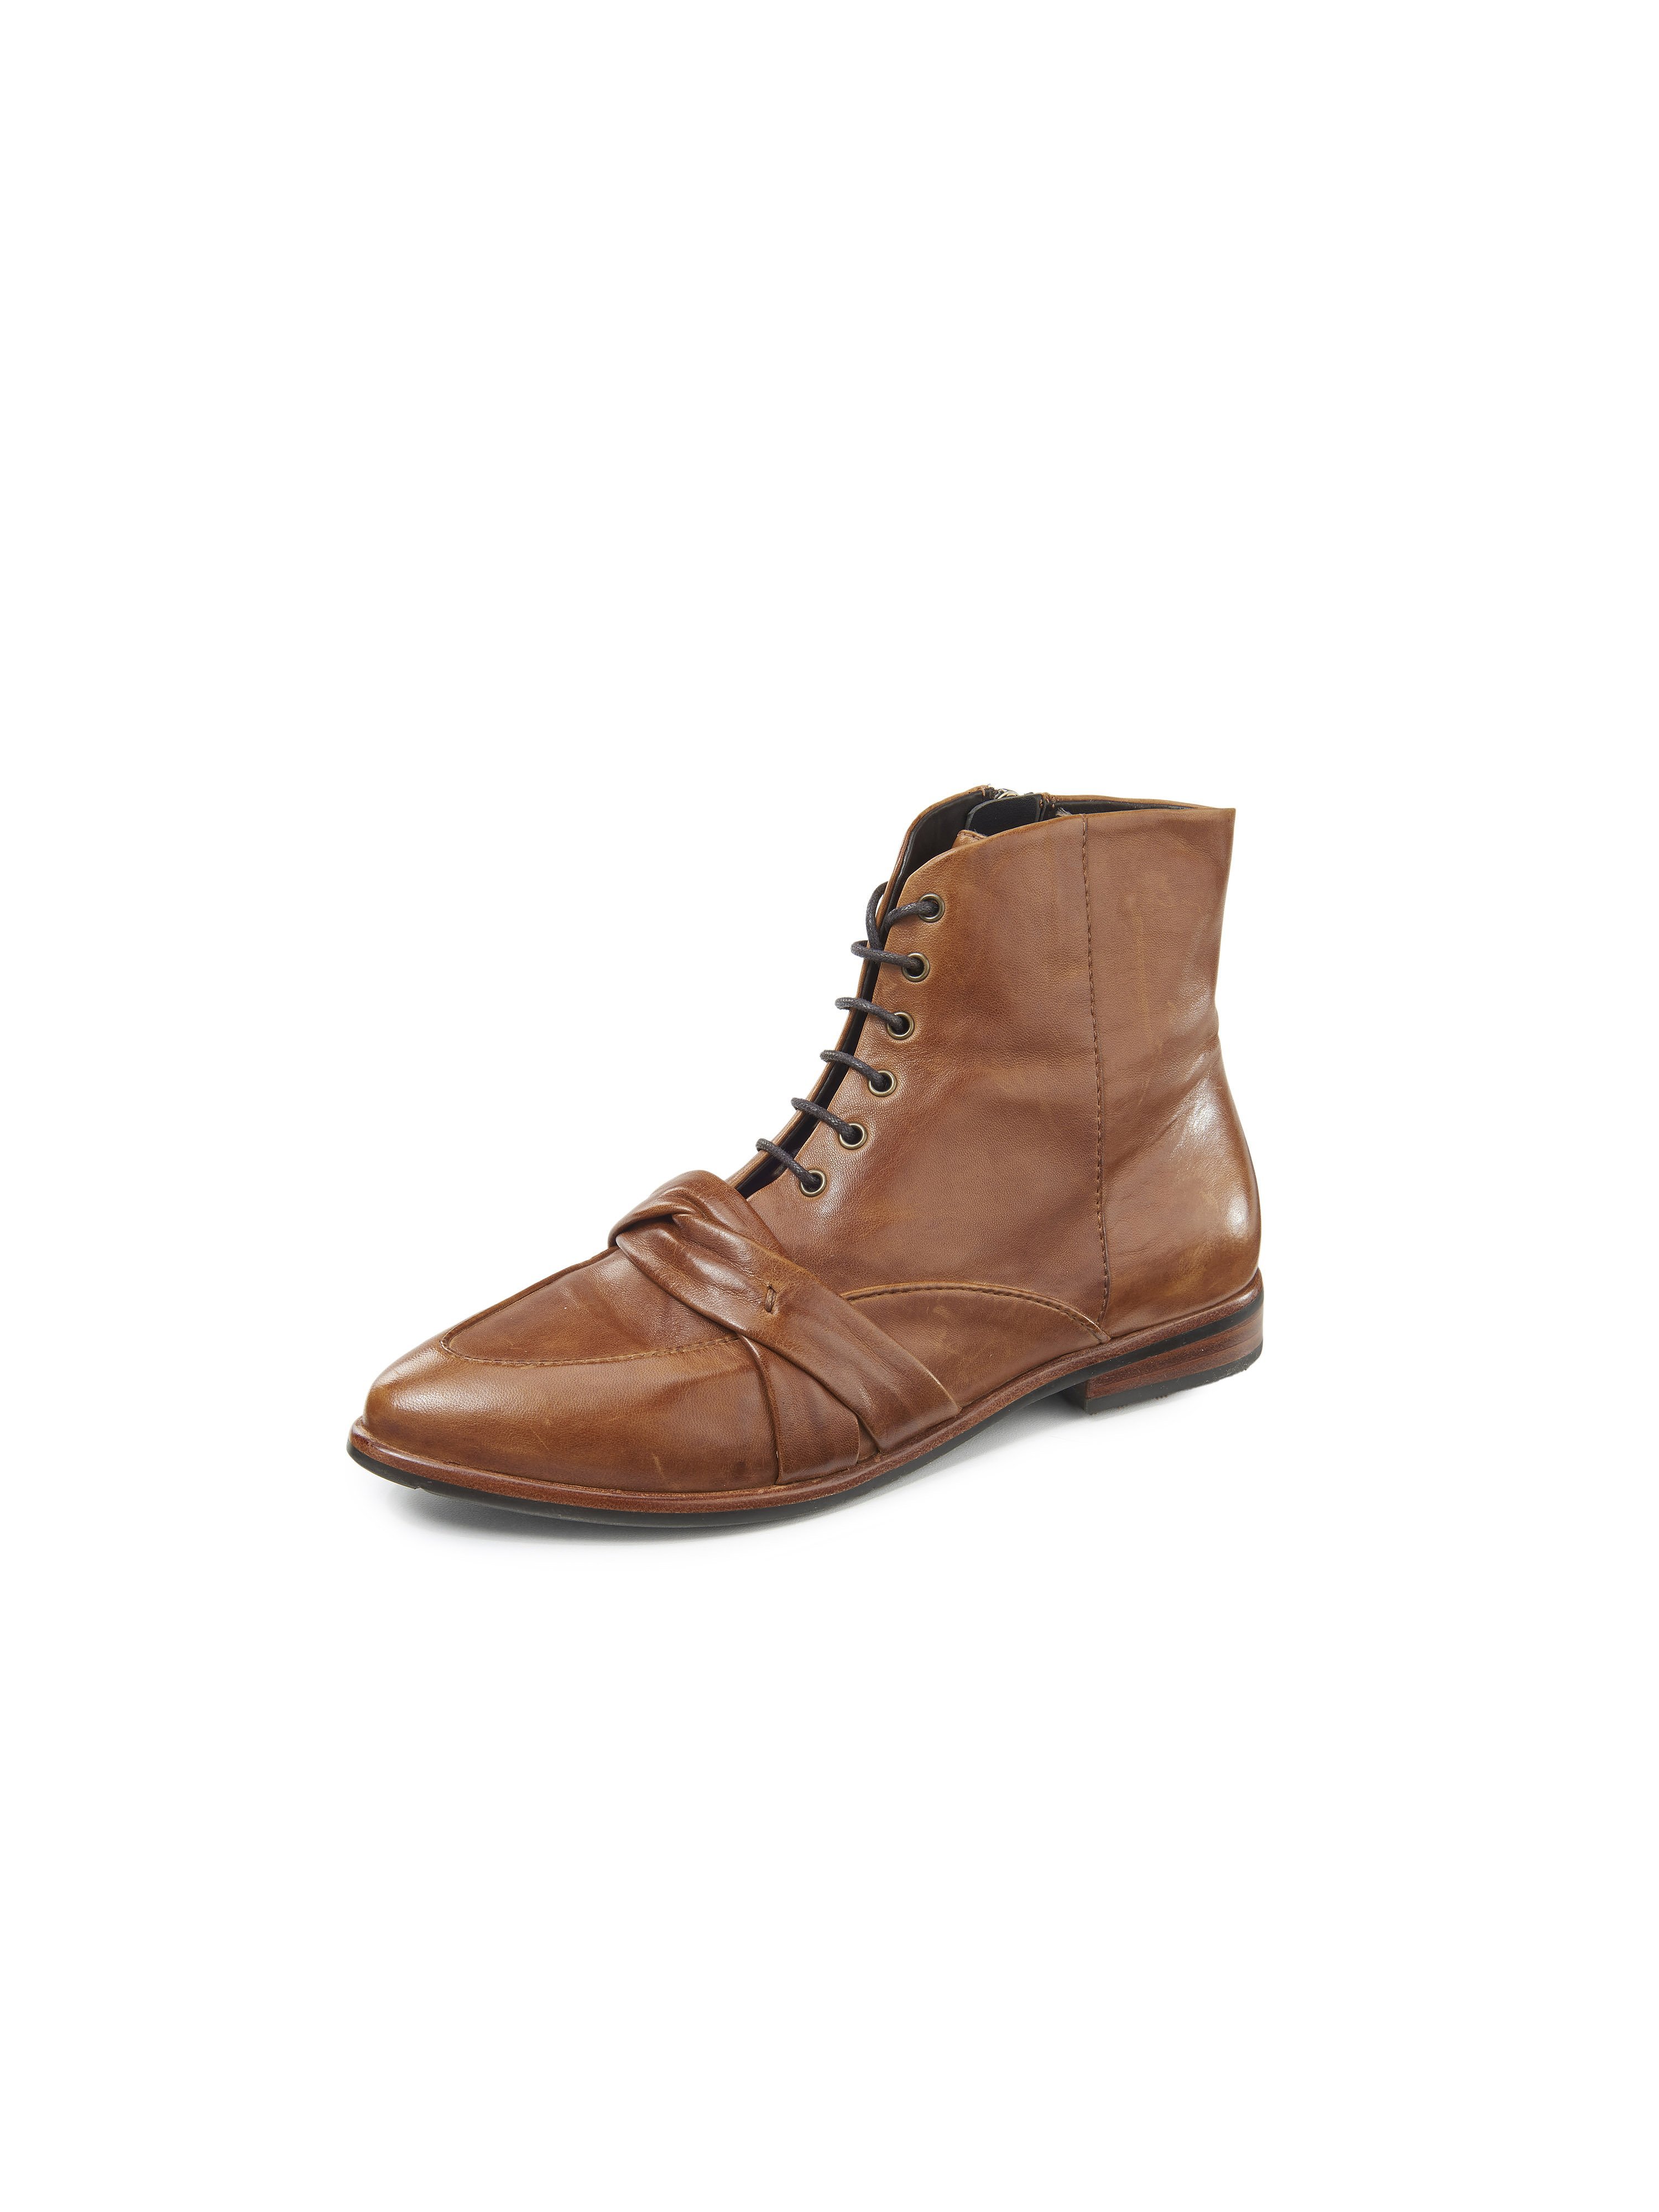 Les bottines à lacets Beek  EVERYBODY marron taille 39,5